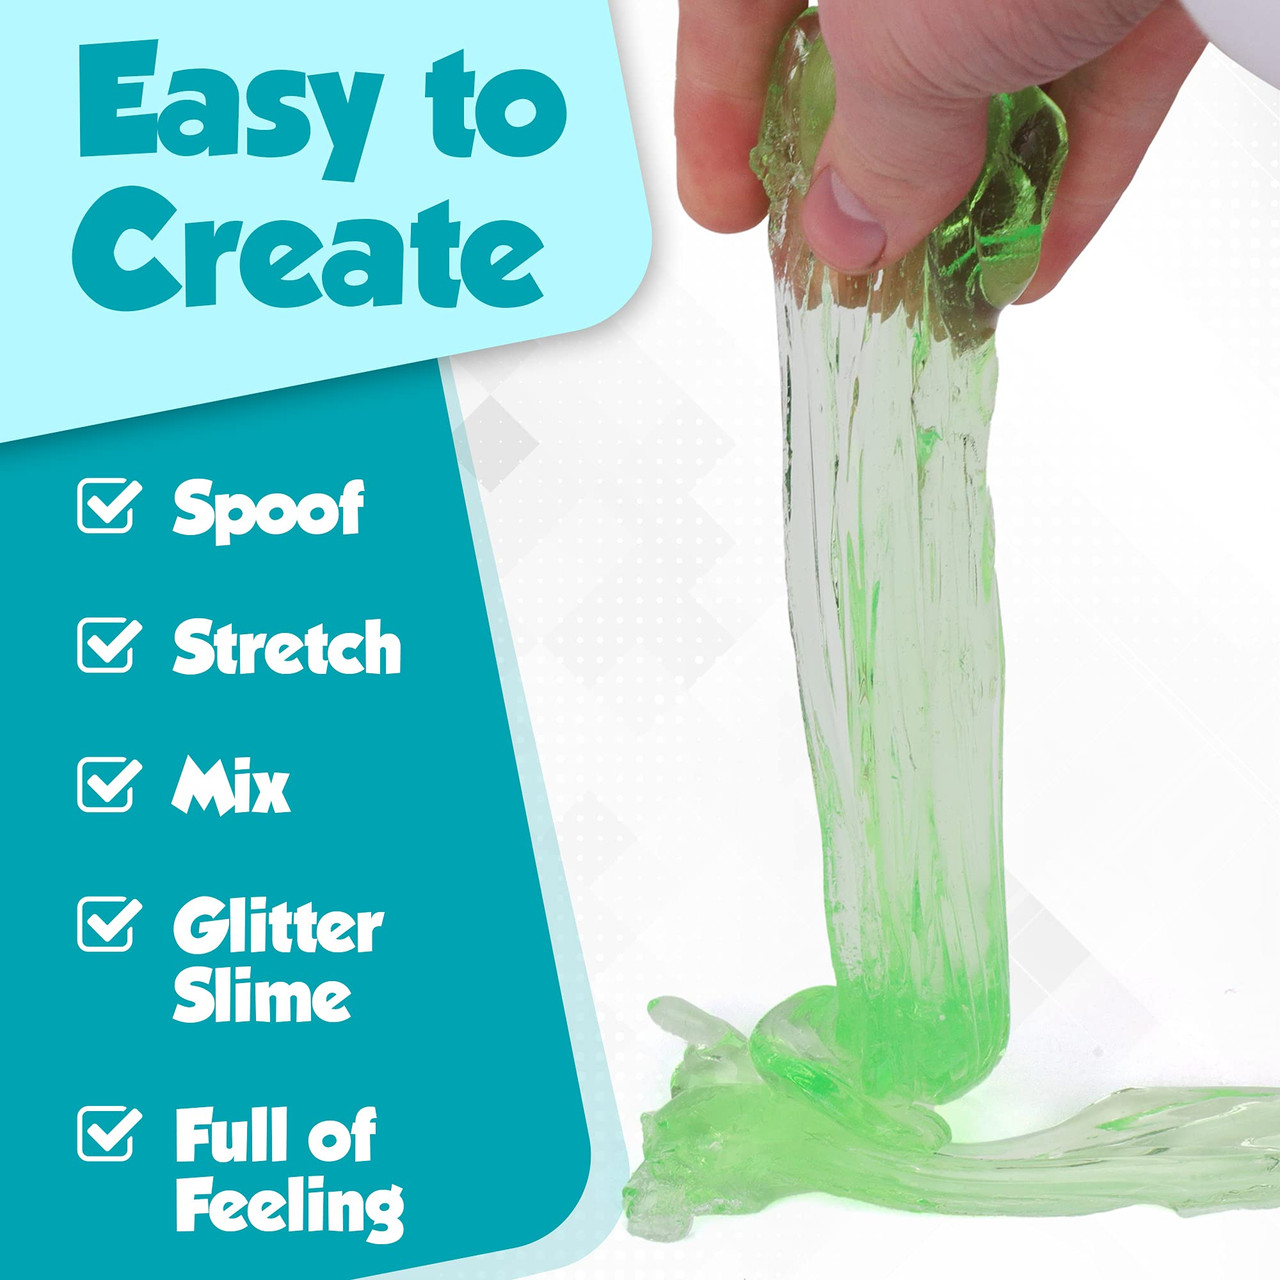 Slime Making Kit Includes 4 Pack Butter Slime And 2 Pack Crystal